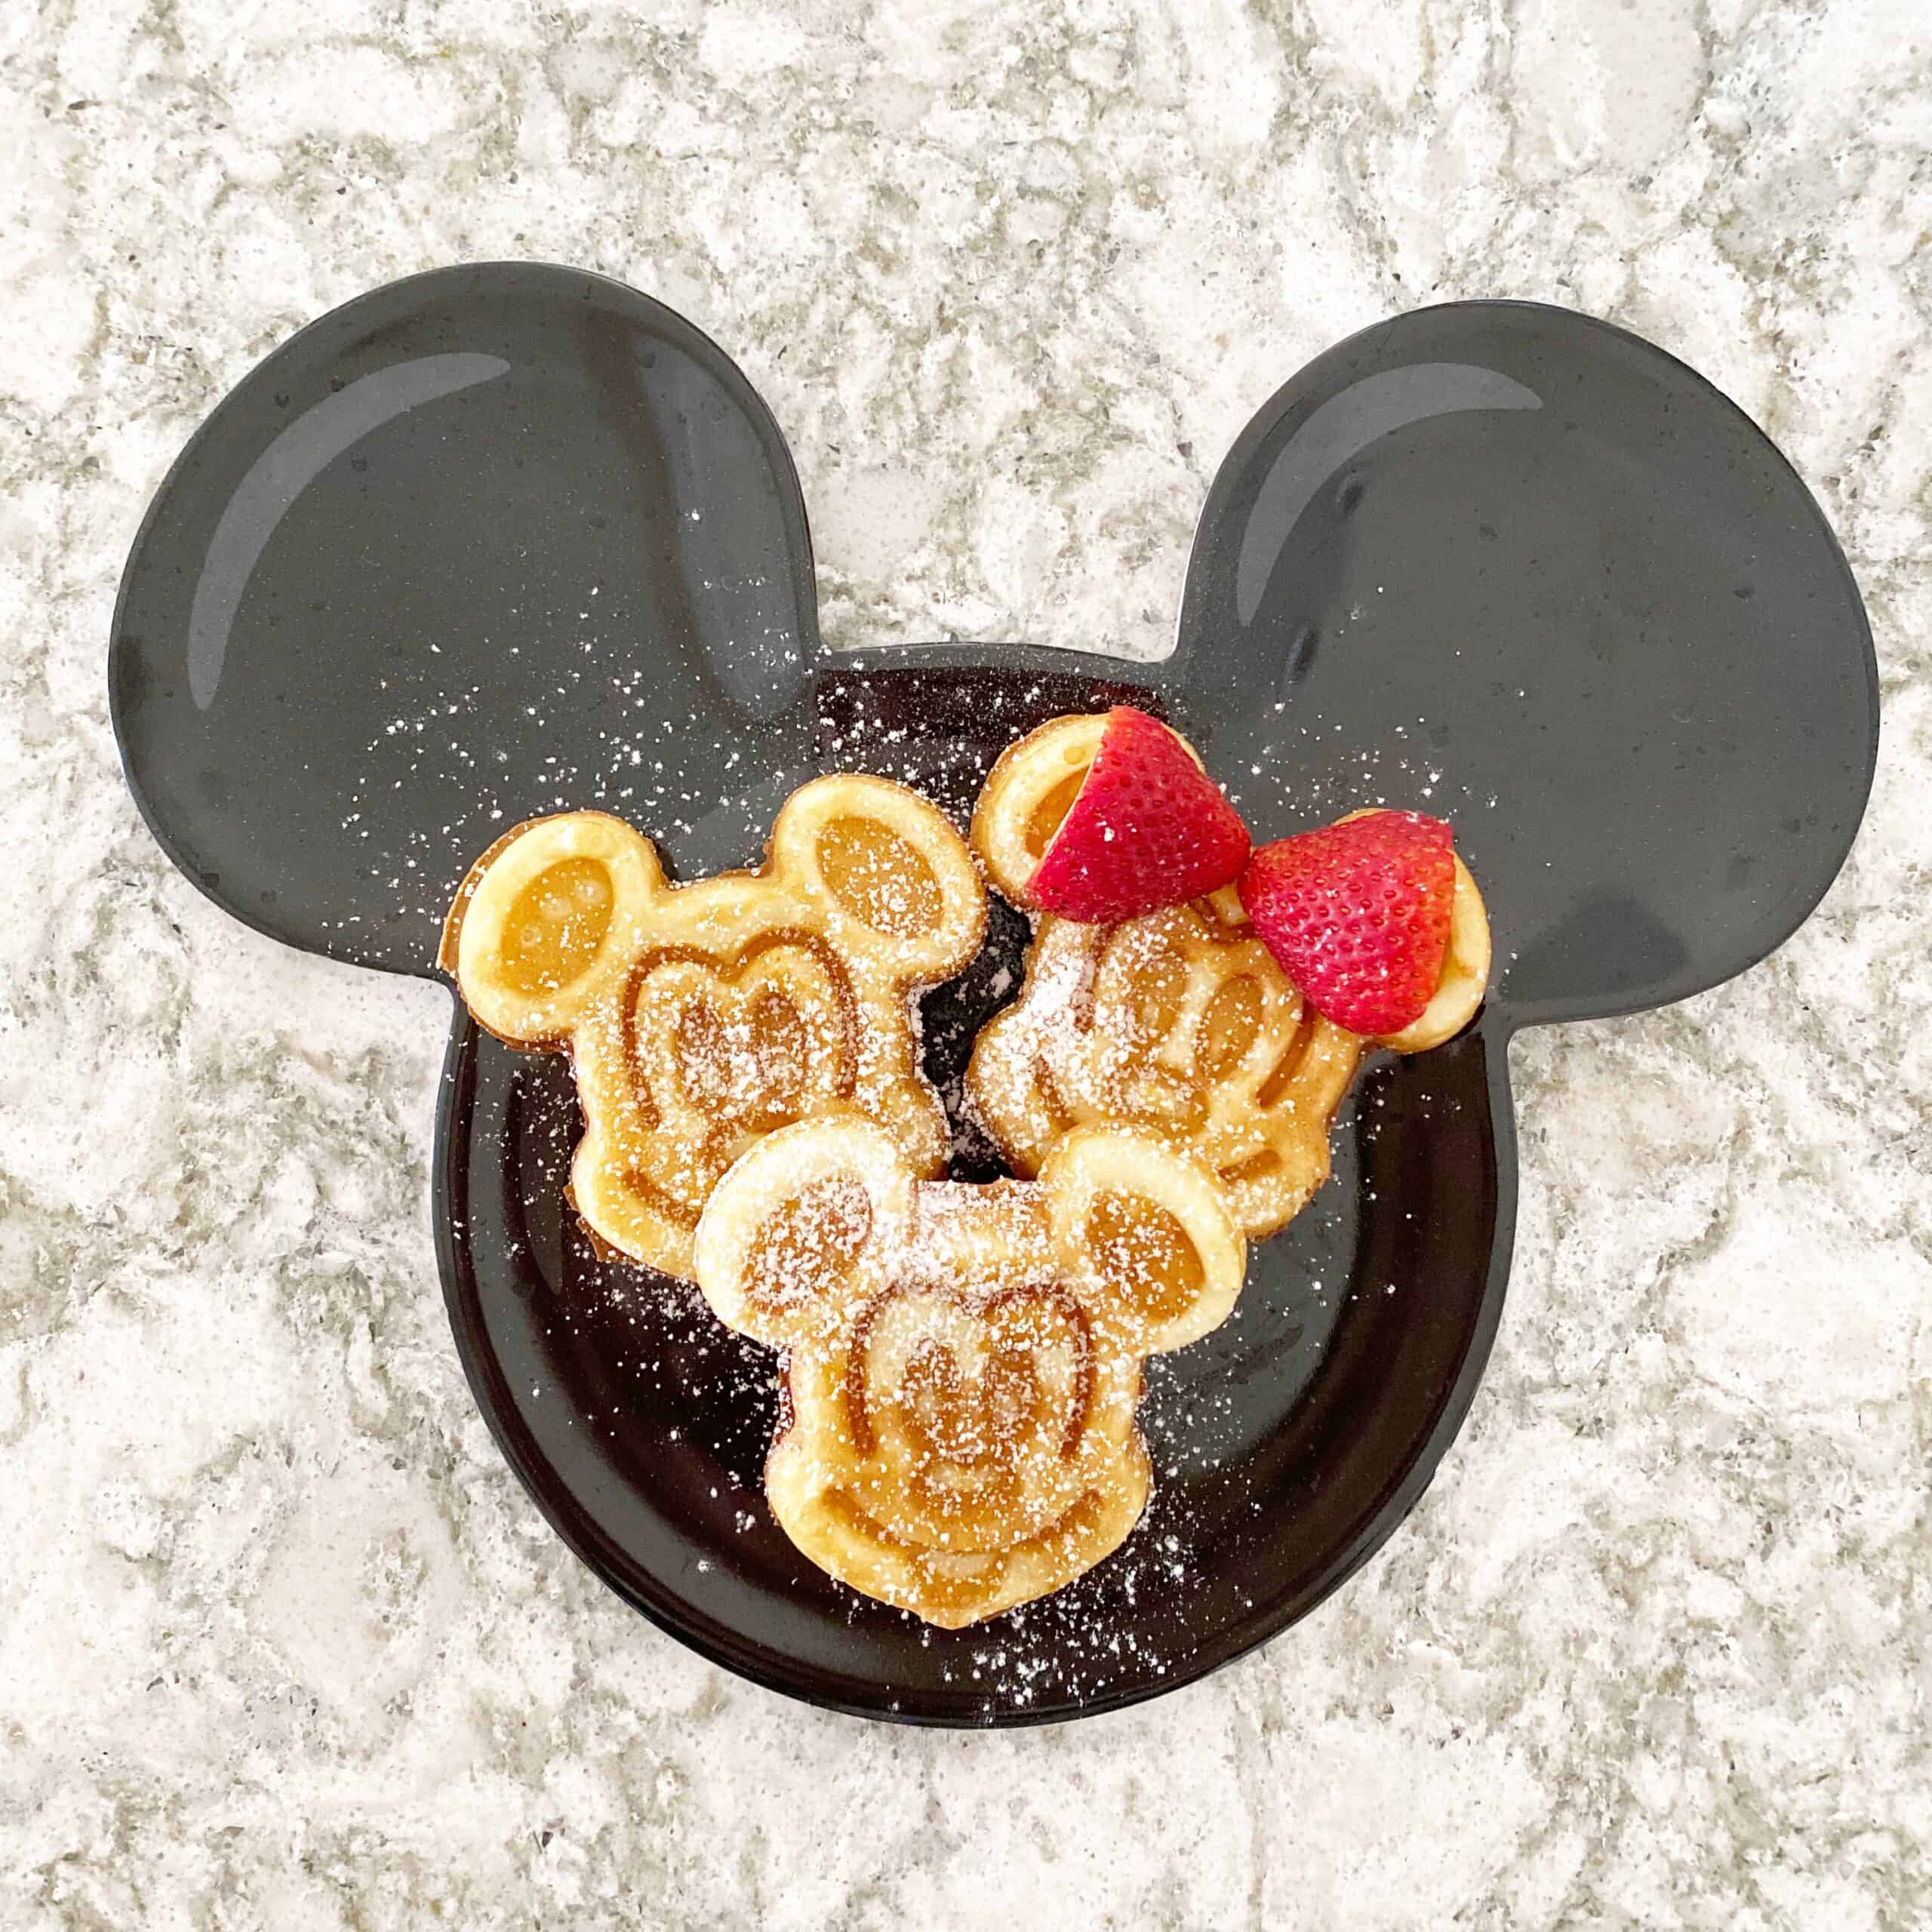 Make Mornings Magical With This Commemorative Mickey Mouse Waffle Maker